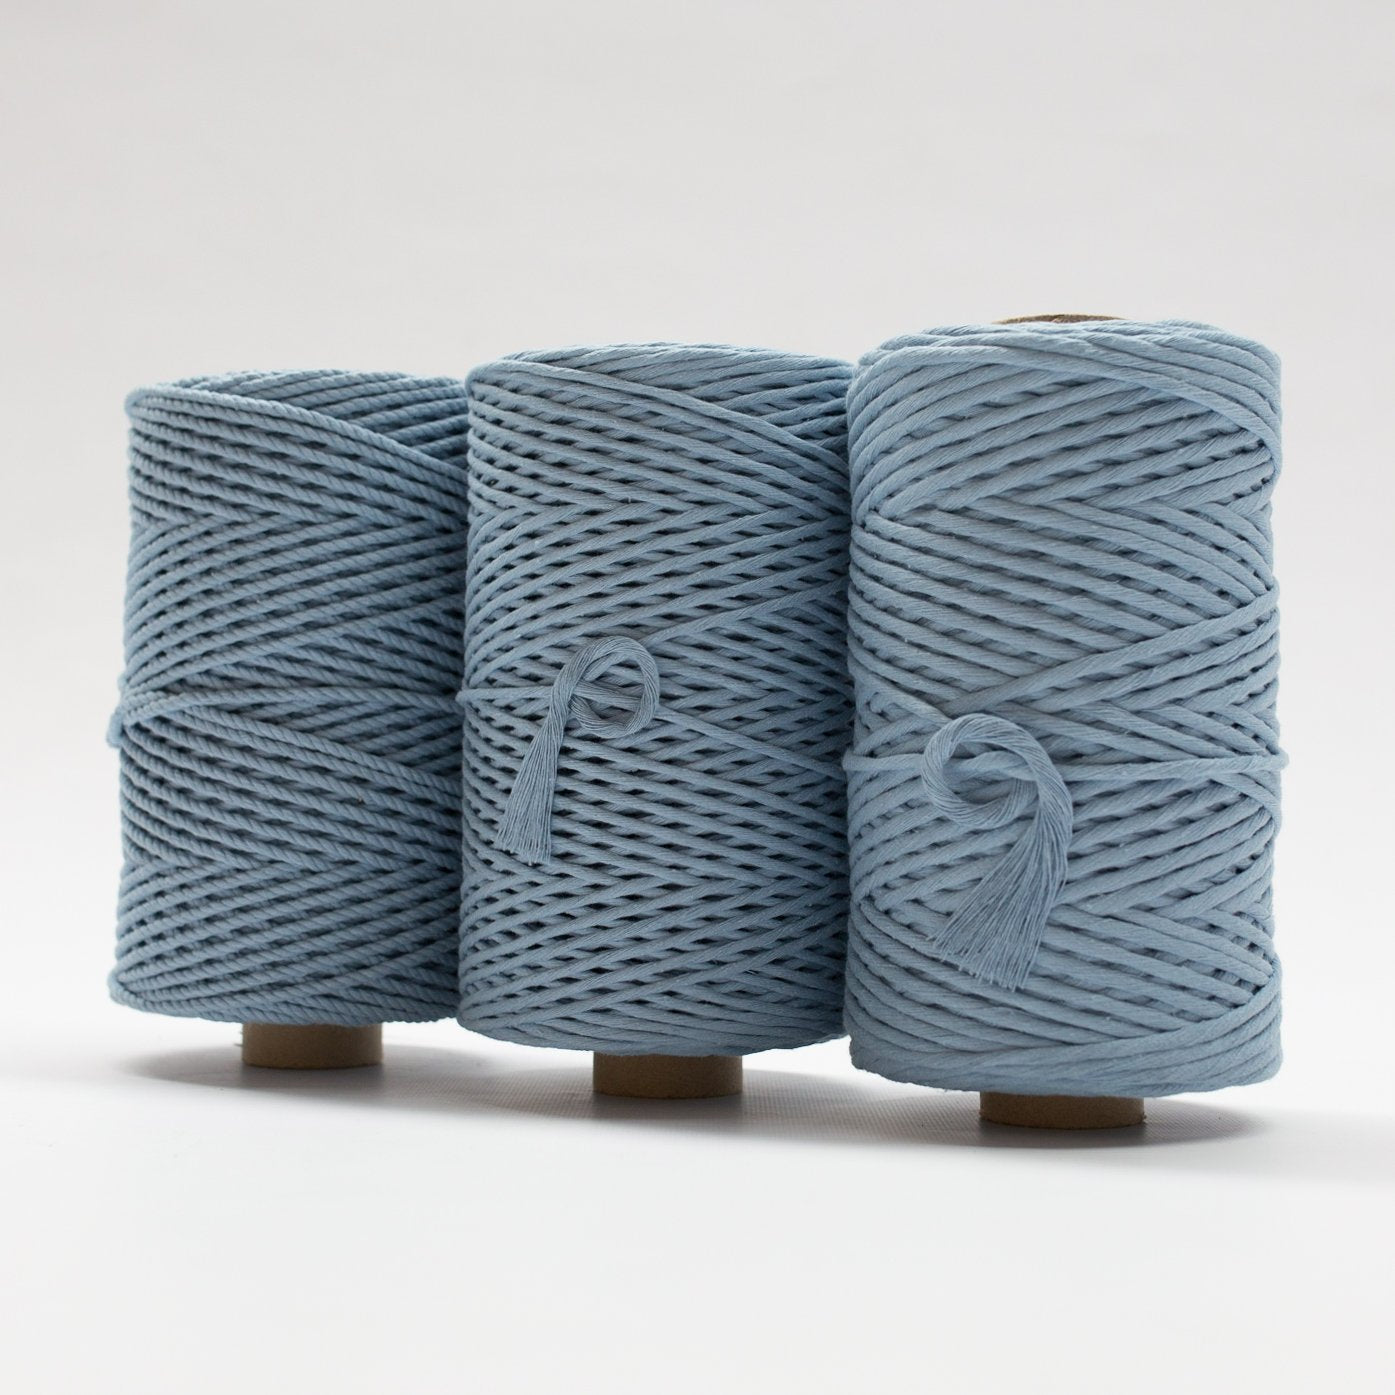 Mary Maker Studio Luxe Colour Cotton 4mm 1KG Recycled Luxe Macrame Rope // Powder Blue macrame cotton macrame rope macrame workshop macrame patterns macrame